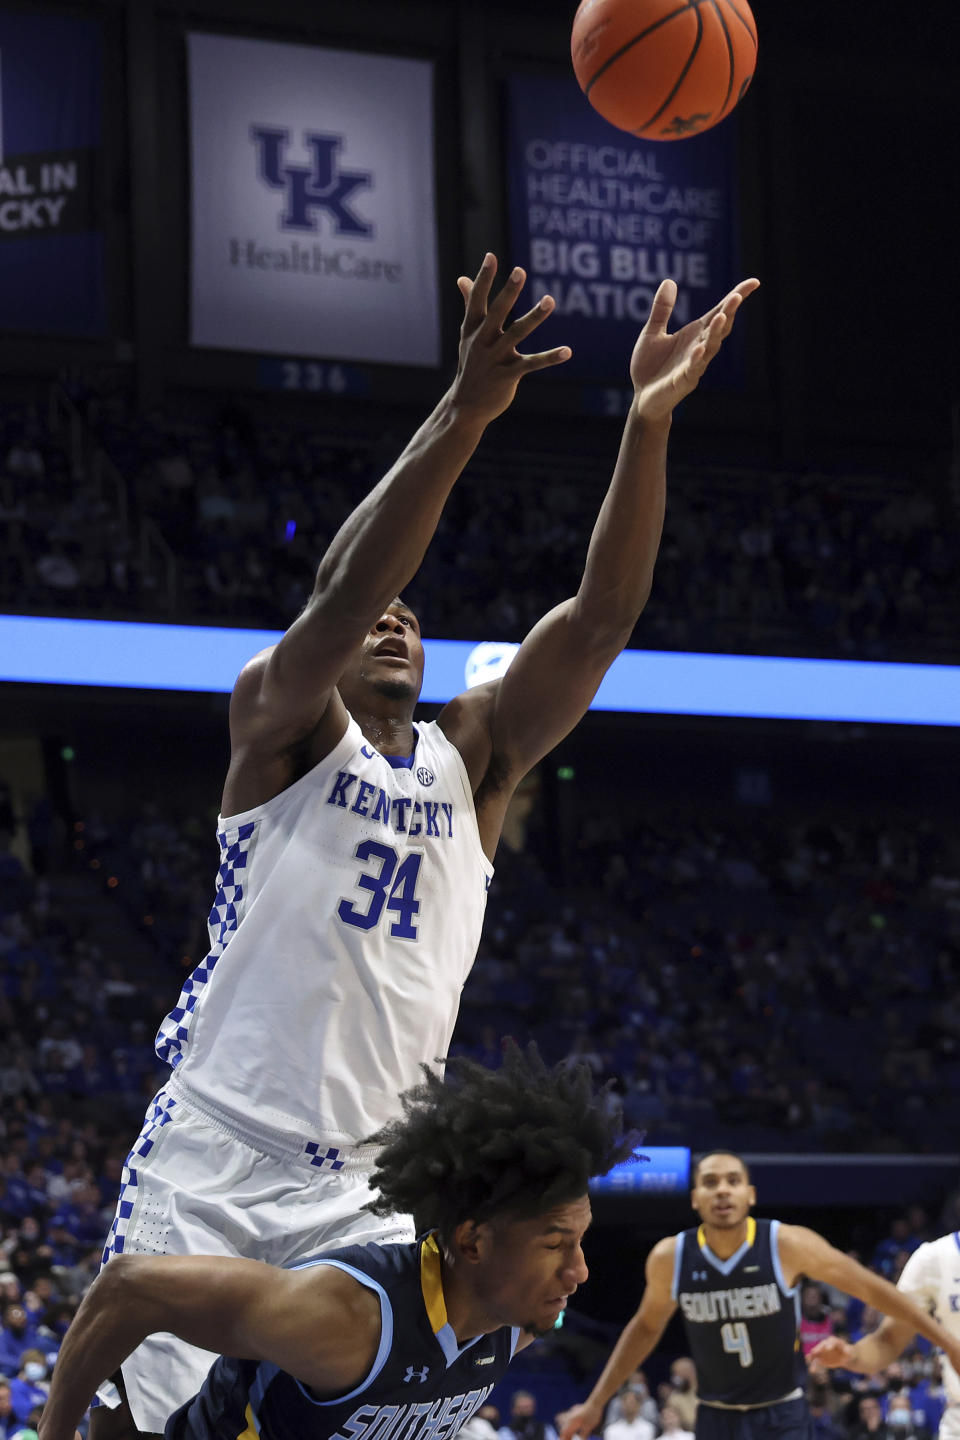 Kentucky's Oscar Tshiebwe (34) goes for a rebound above Southern University's P.J. Byrd during the first half of an NCAA college basketball game in Lexington, Ky., Tuesday, Dec. 7, 2021. (AP Photo/James Crisp)